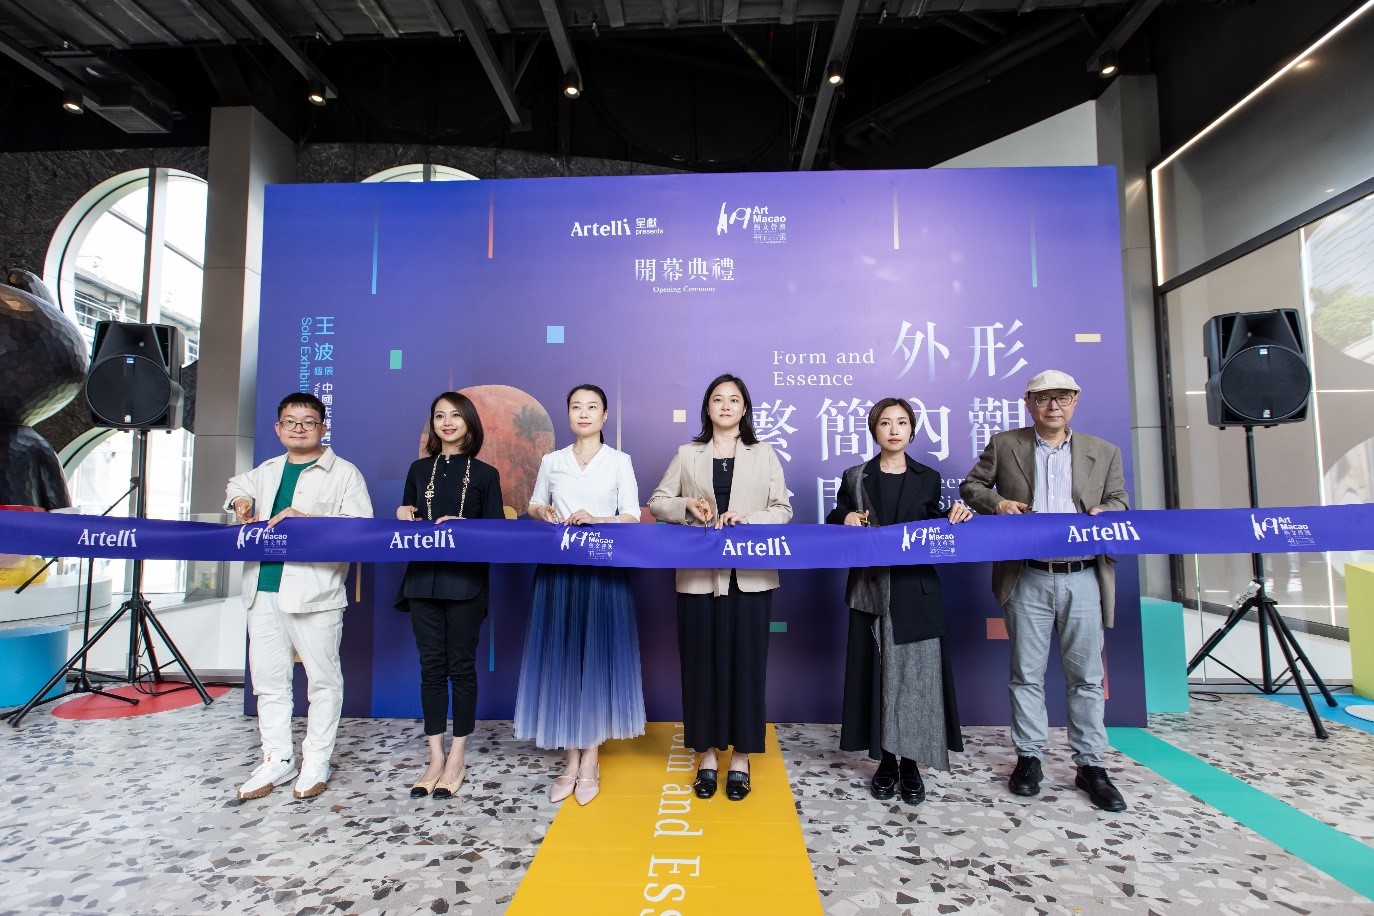 Representatives from Liaison Office of the Central Peoples Government in the Macao SAR, the Macao SAR government, senior executives from Melco Resorts & Entertainment and Forward Fashion, and artist Wang Bo (first from left) joined together to kick off the exhibition at Artelli